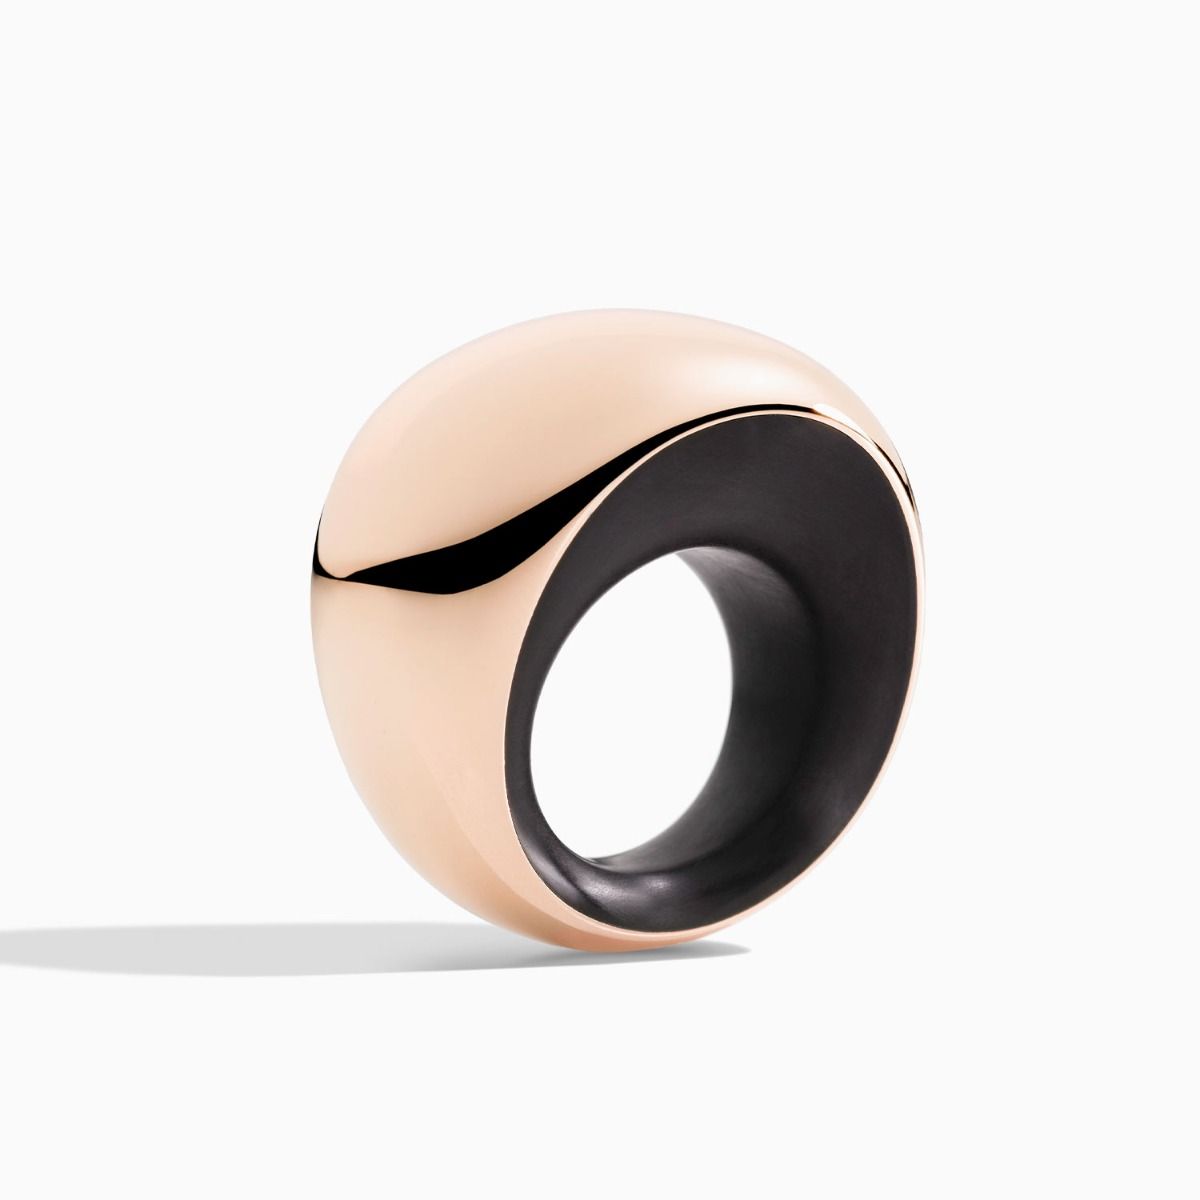 Vhernier Pirouette ring in rose gold with jet